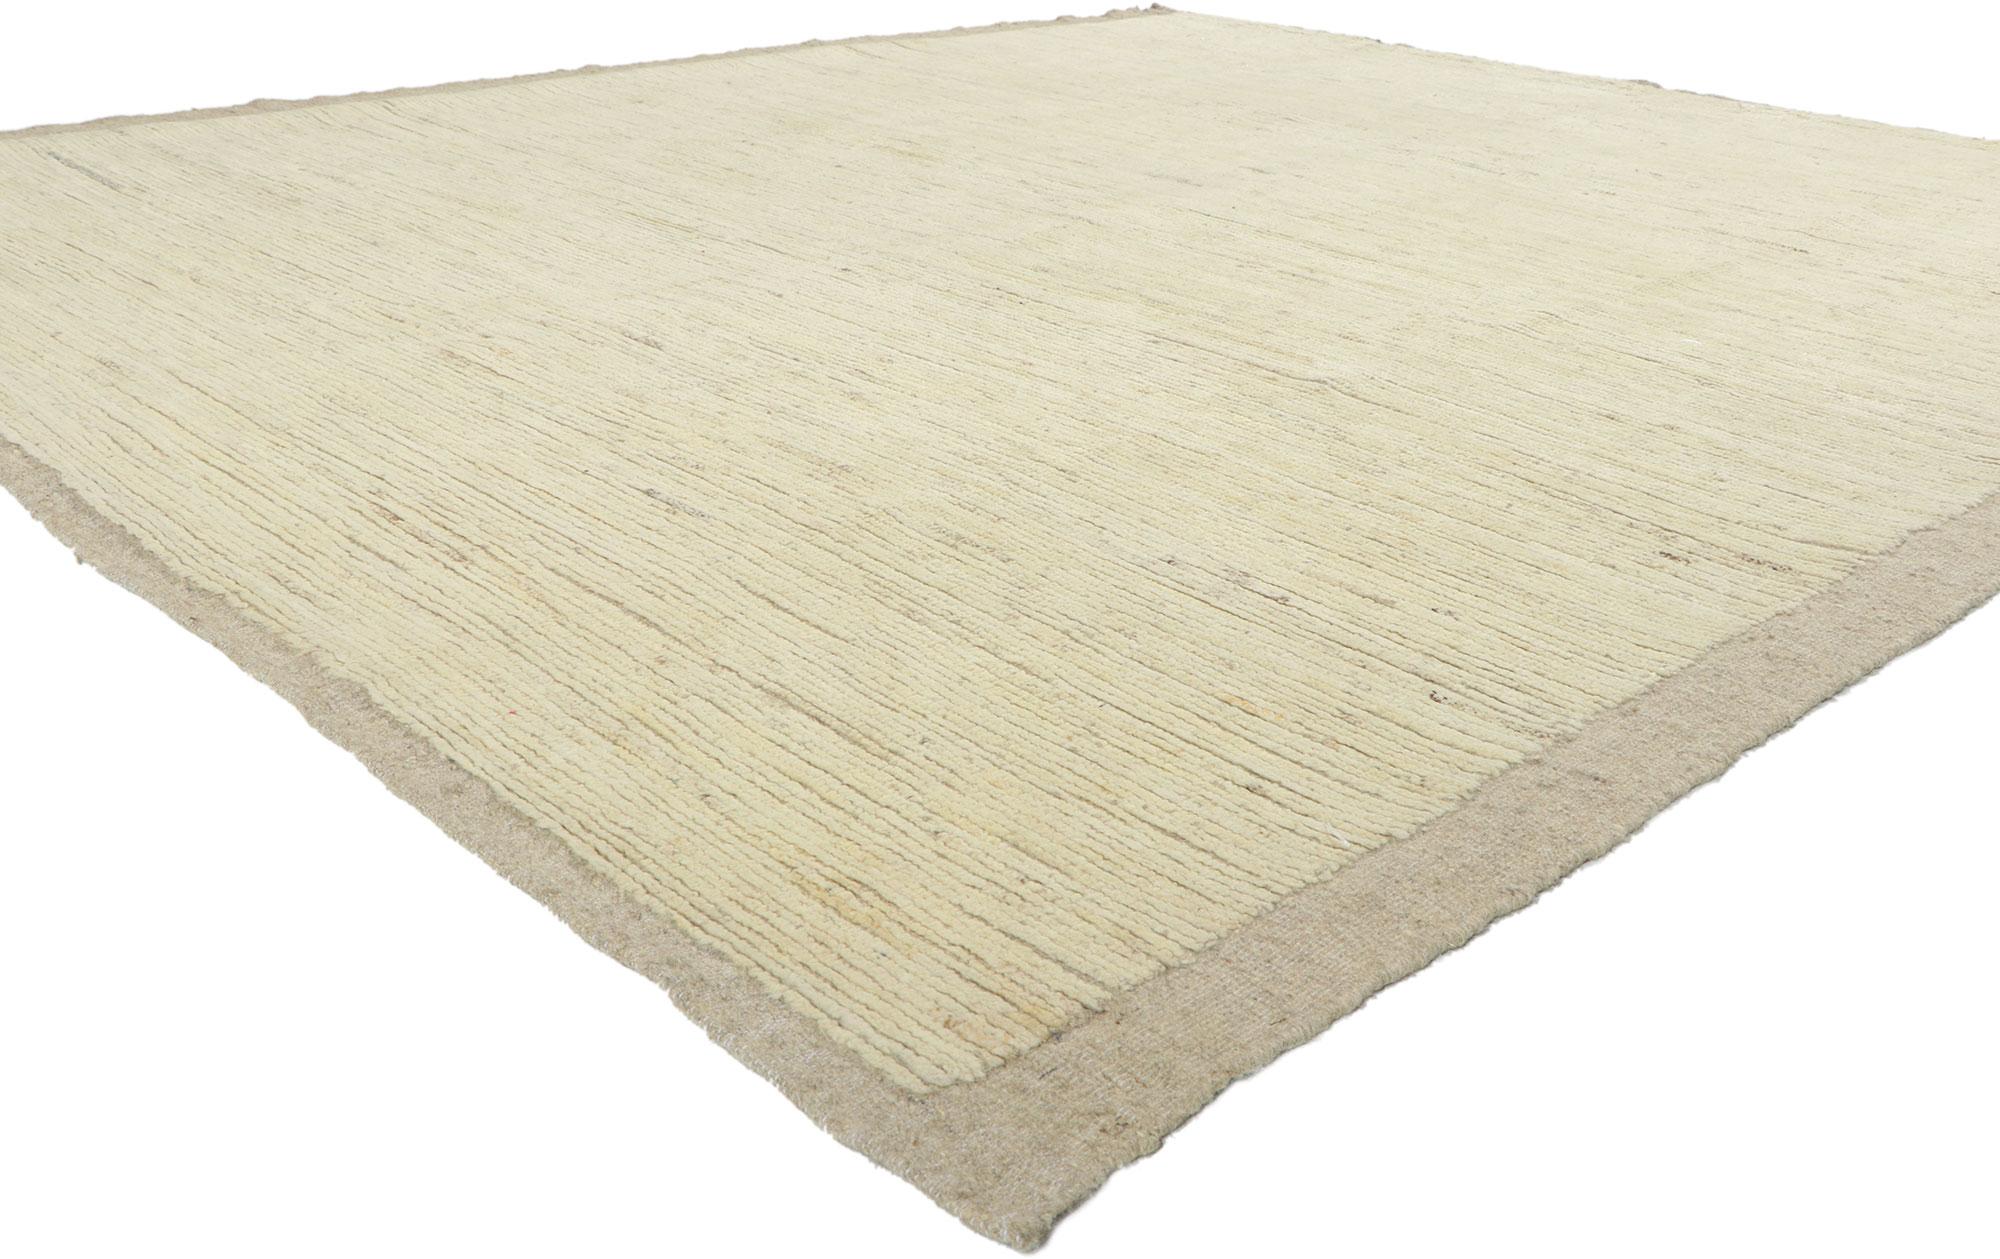 80798 New Contemporary Moroccan Rug with Short Pile, 08'06 x 09'10. Effortless beauty combined with simplicity and minimalist style, this hand-knotted wool contemporary Moroccan area rug provides a feeling of cozy contentment without the clutter.